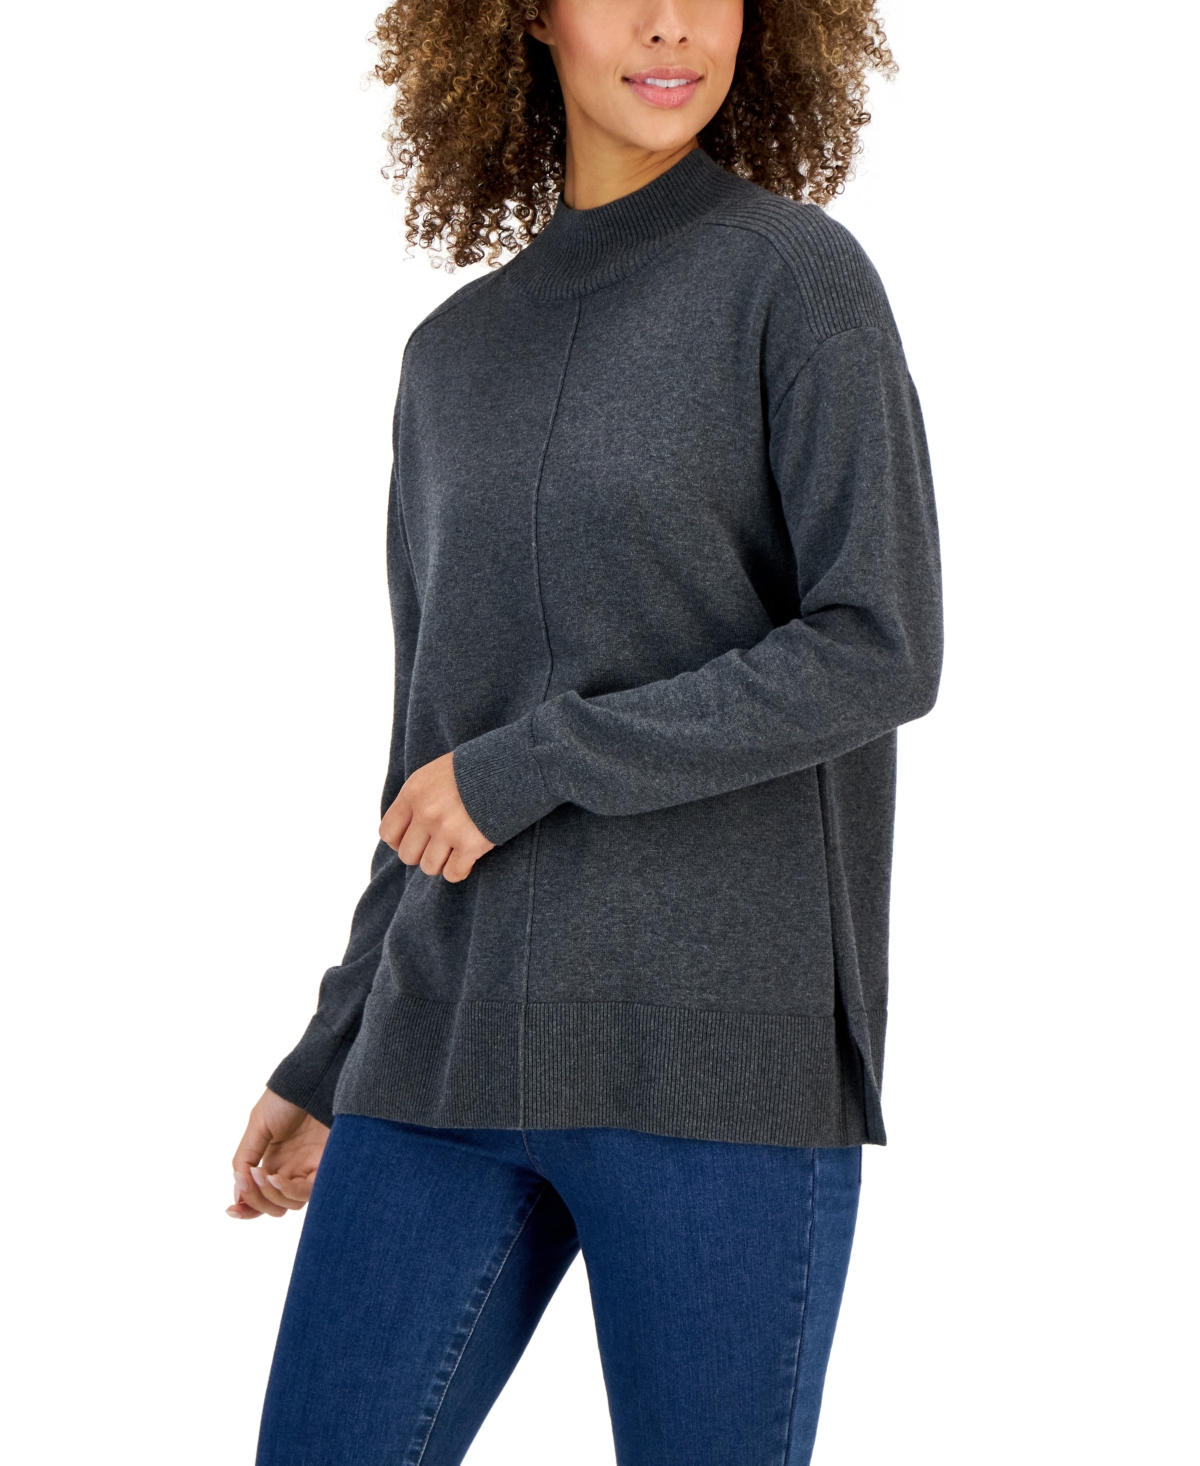 Women's Cotton Seam-Front Mock Neck Sweater, Created for Macy's - Charcoal Heather